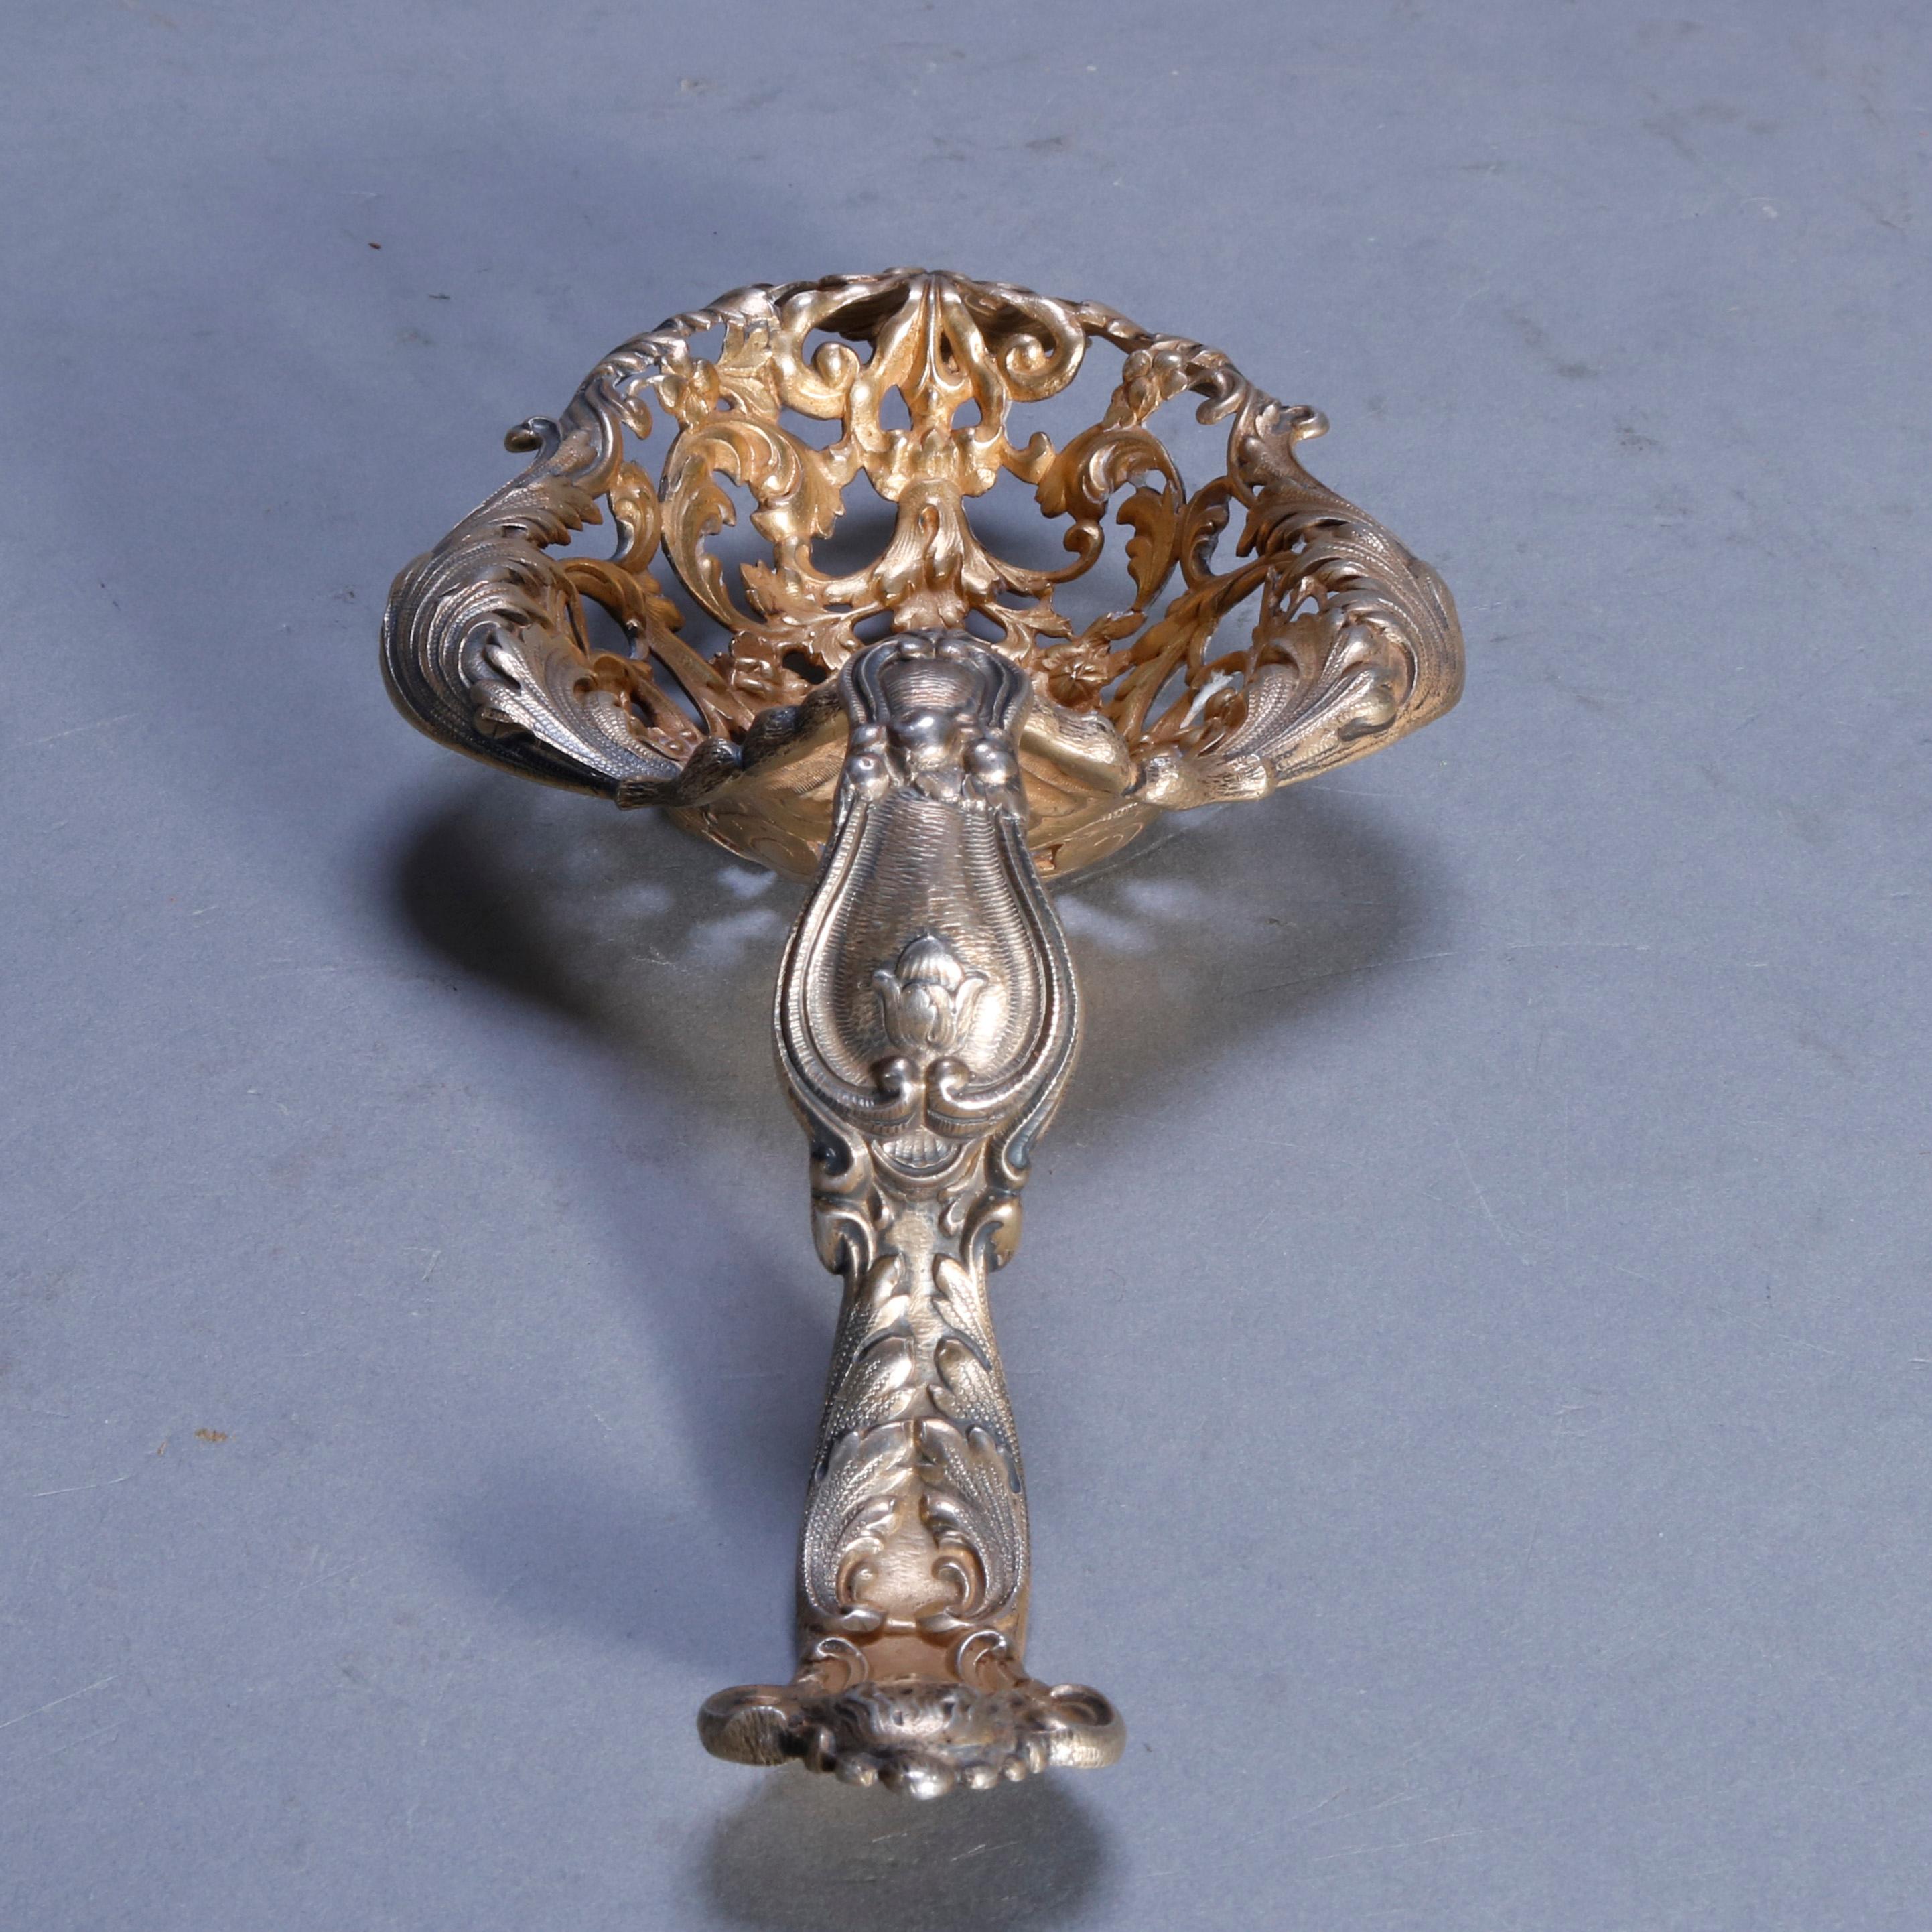 19th Century Oversize Antique Sterling Silver Figural Straining Spoon, circa 1880